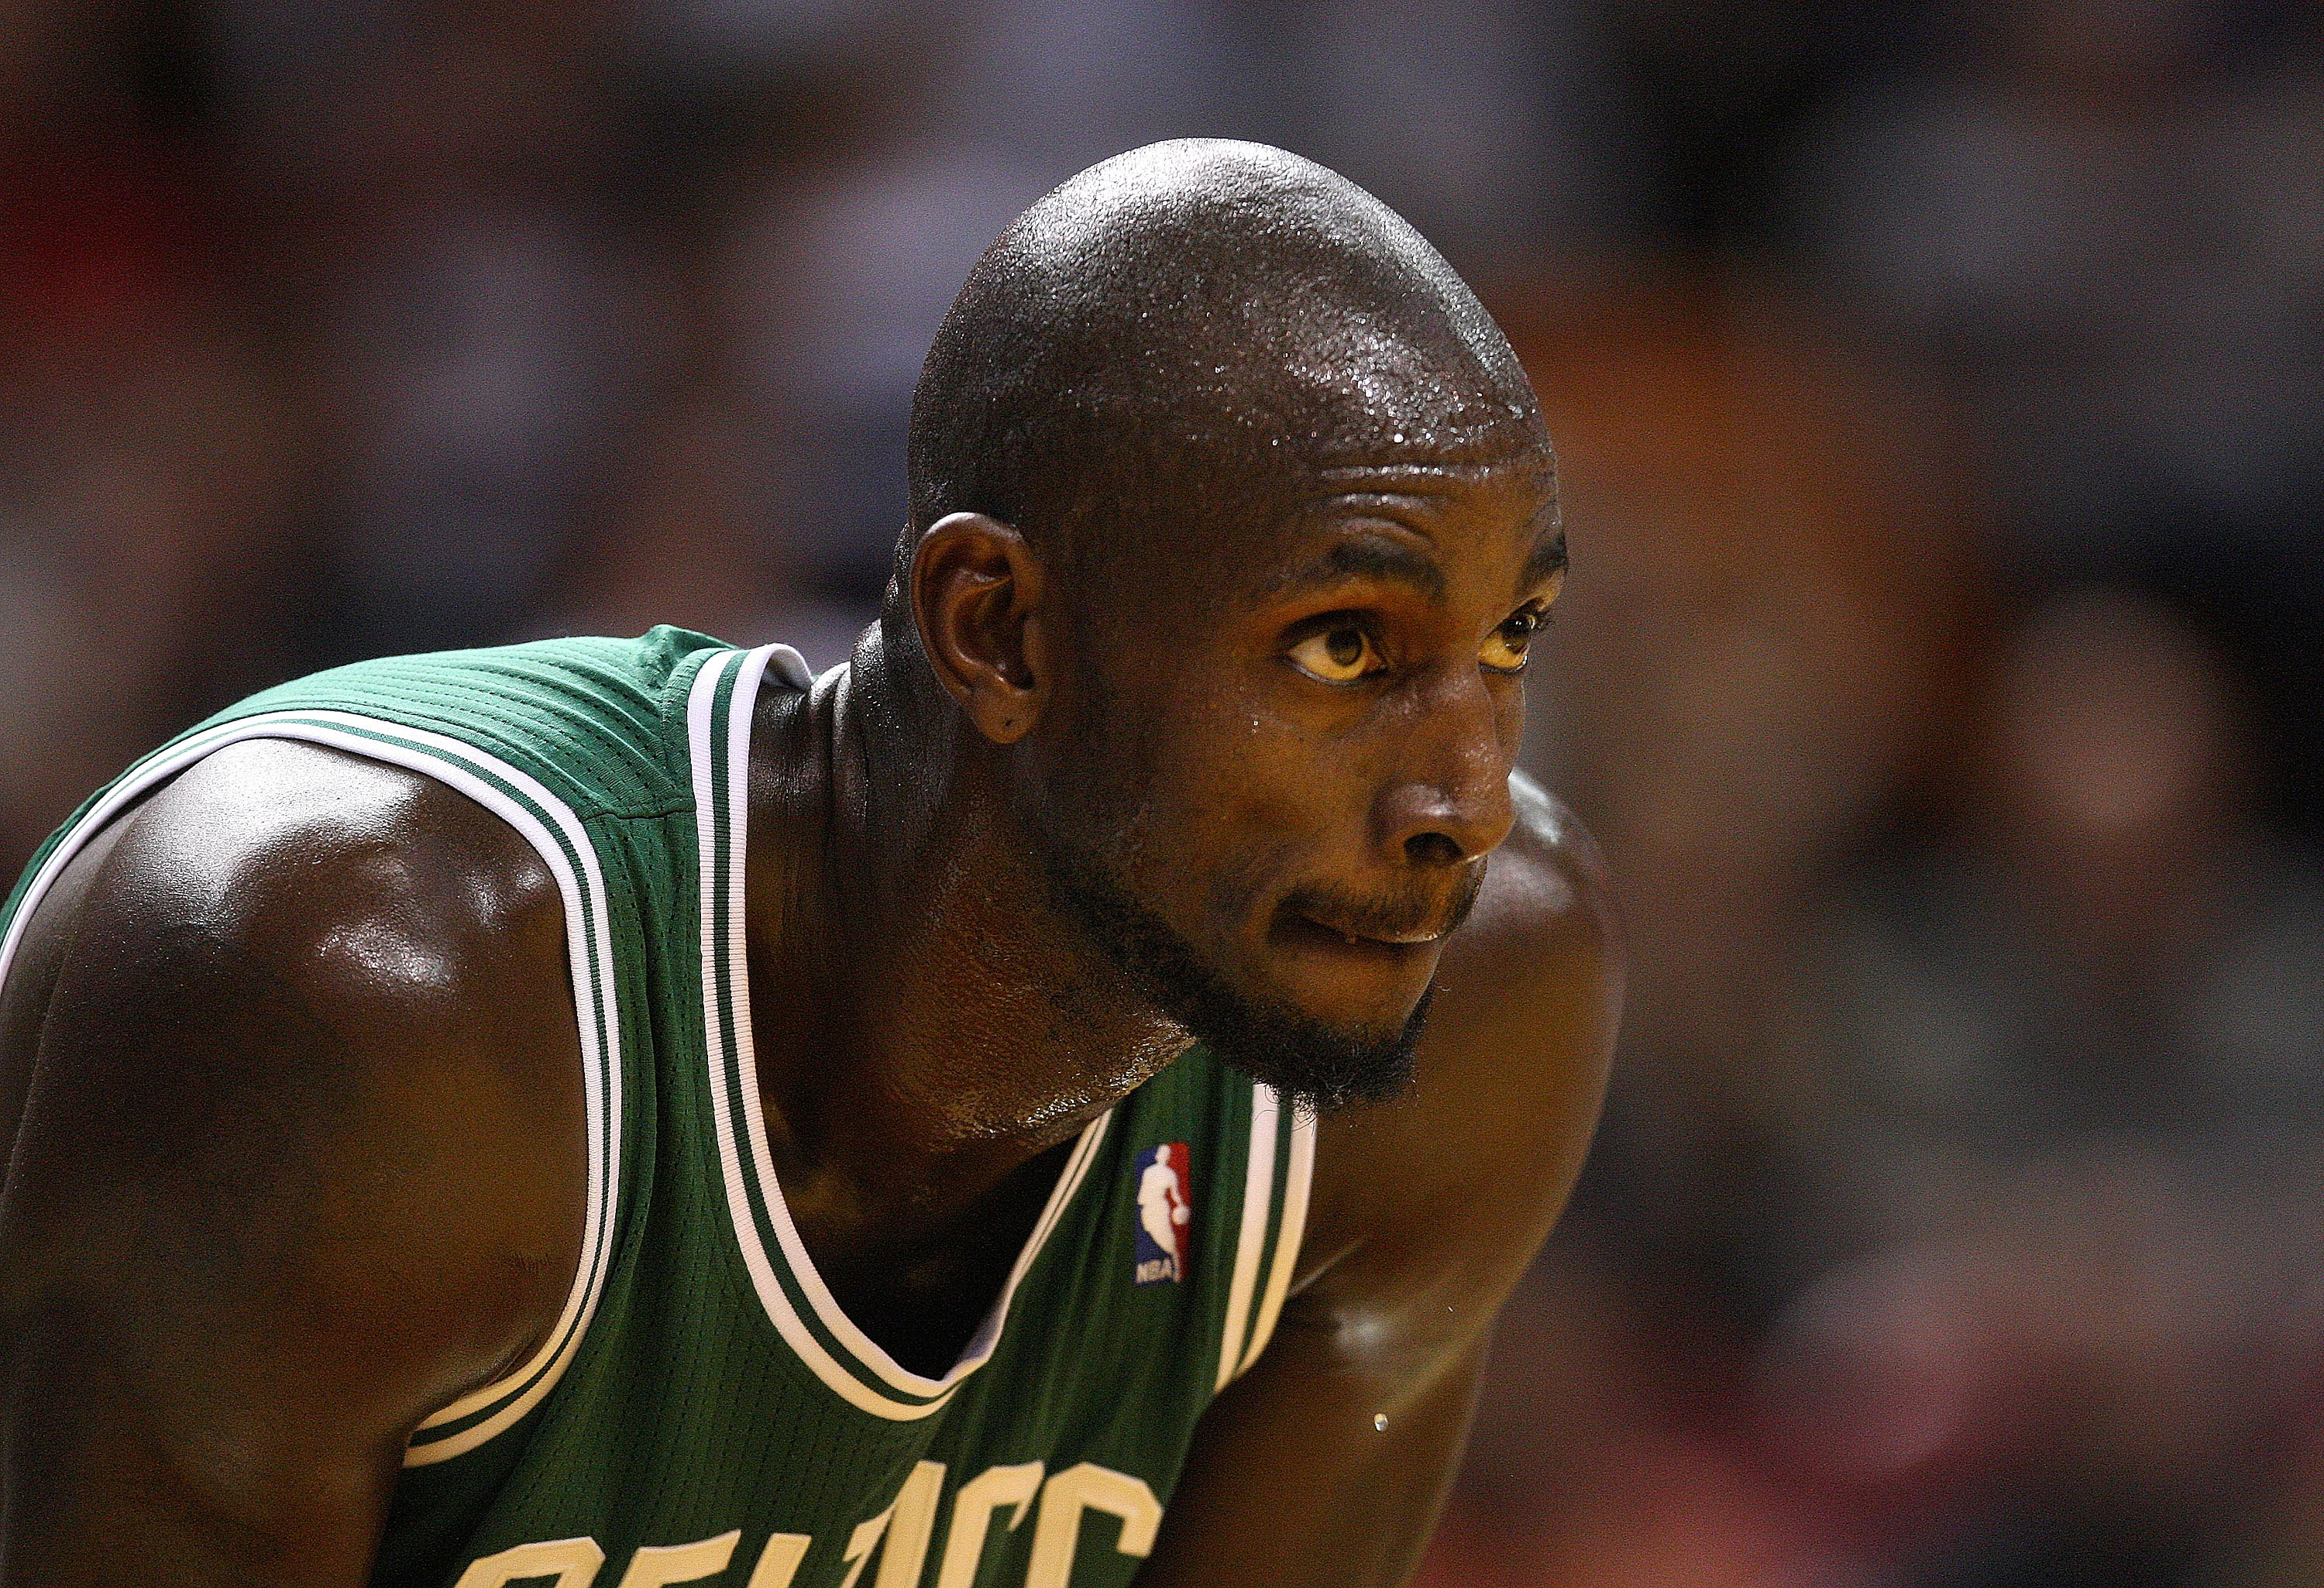 Kevin Garnett: 10 Creative Ways He Can Make Amends for His 